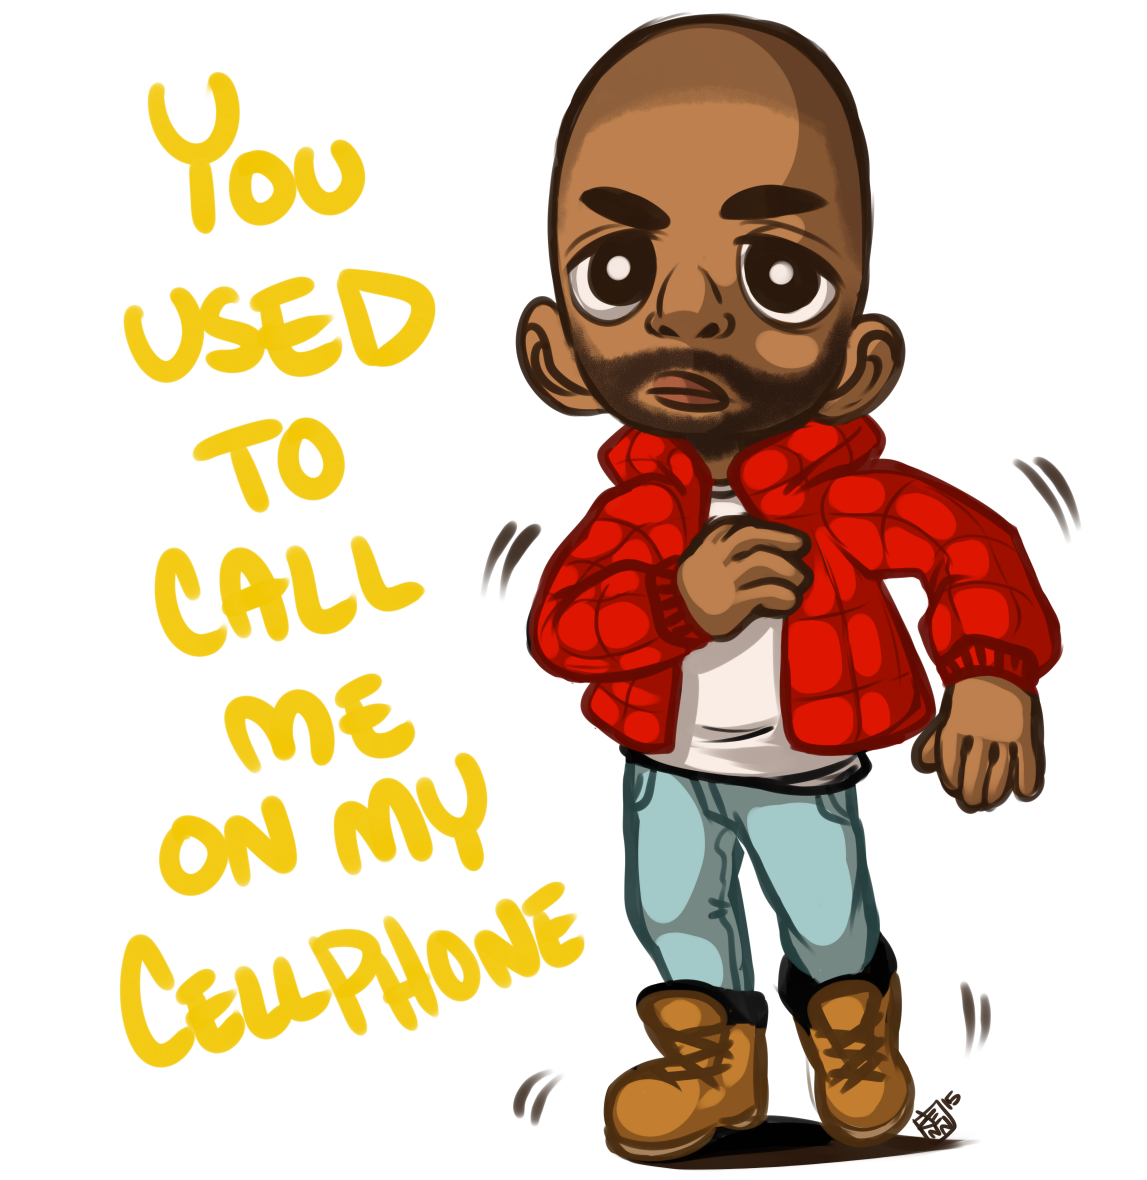 ✧ (◕︿◕✿) ✧ — Drake's outfit in his new Hotline Bling video was...